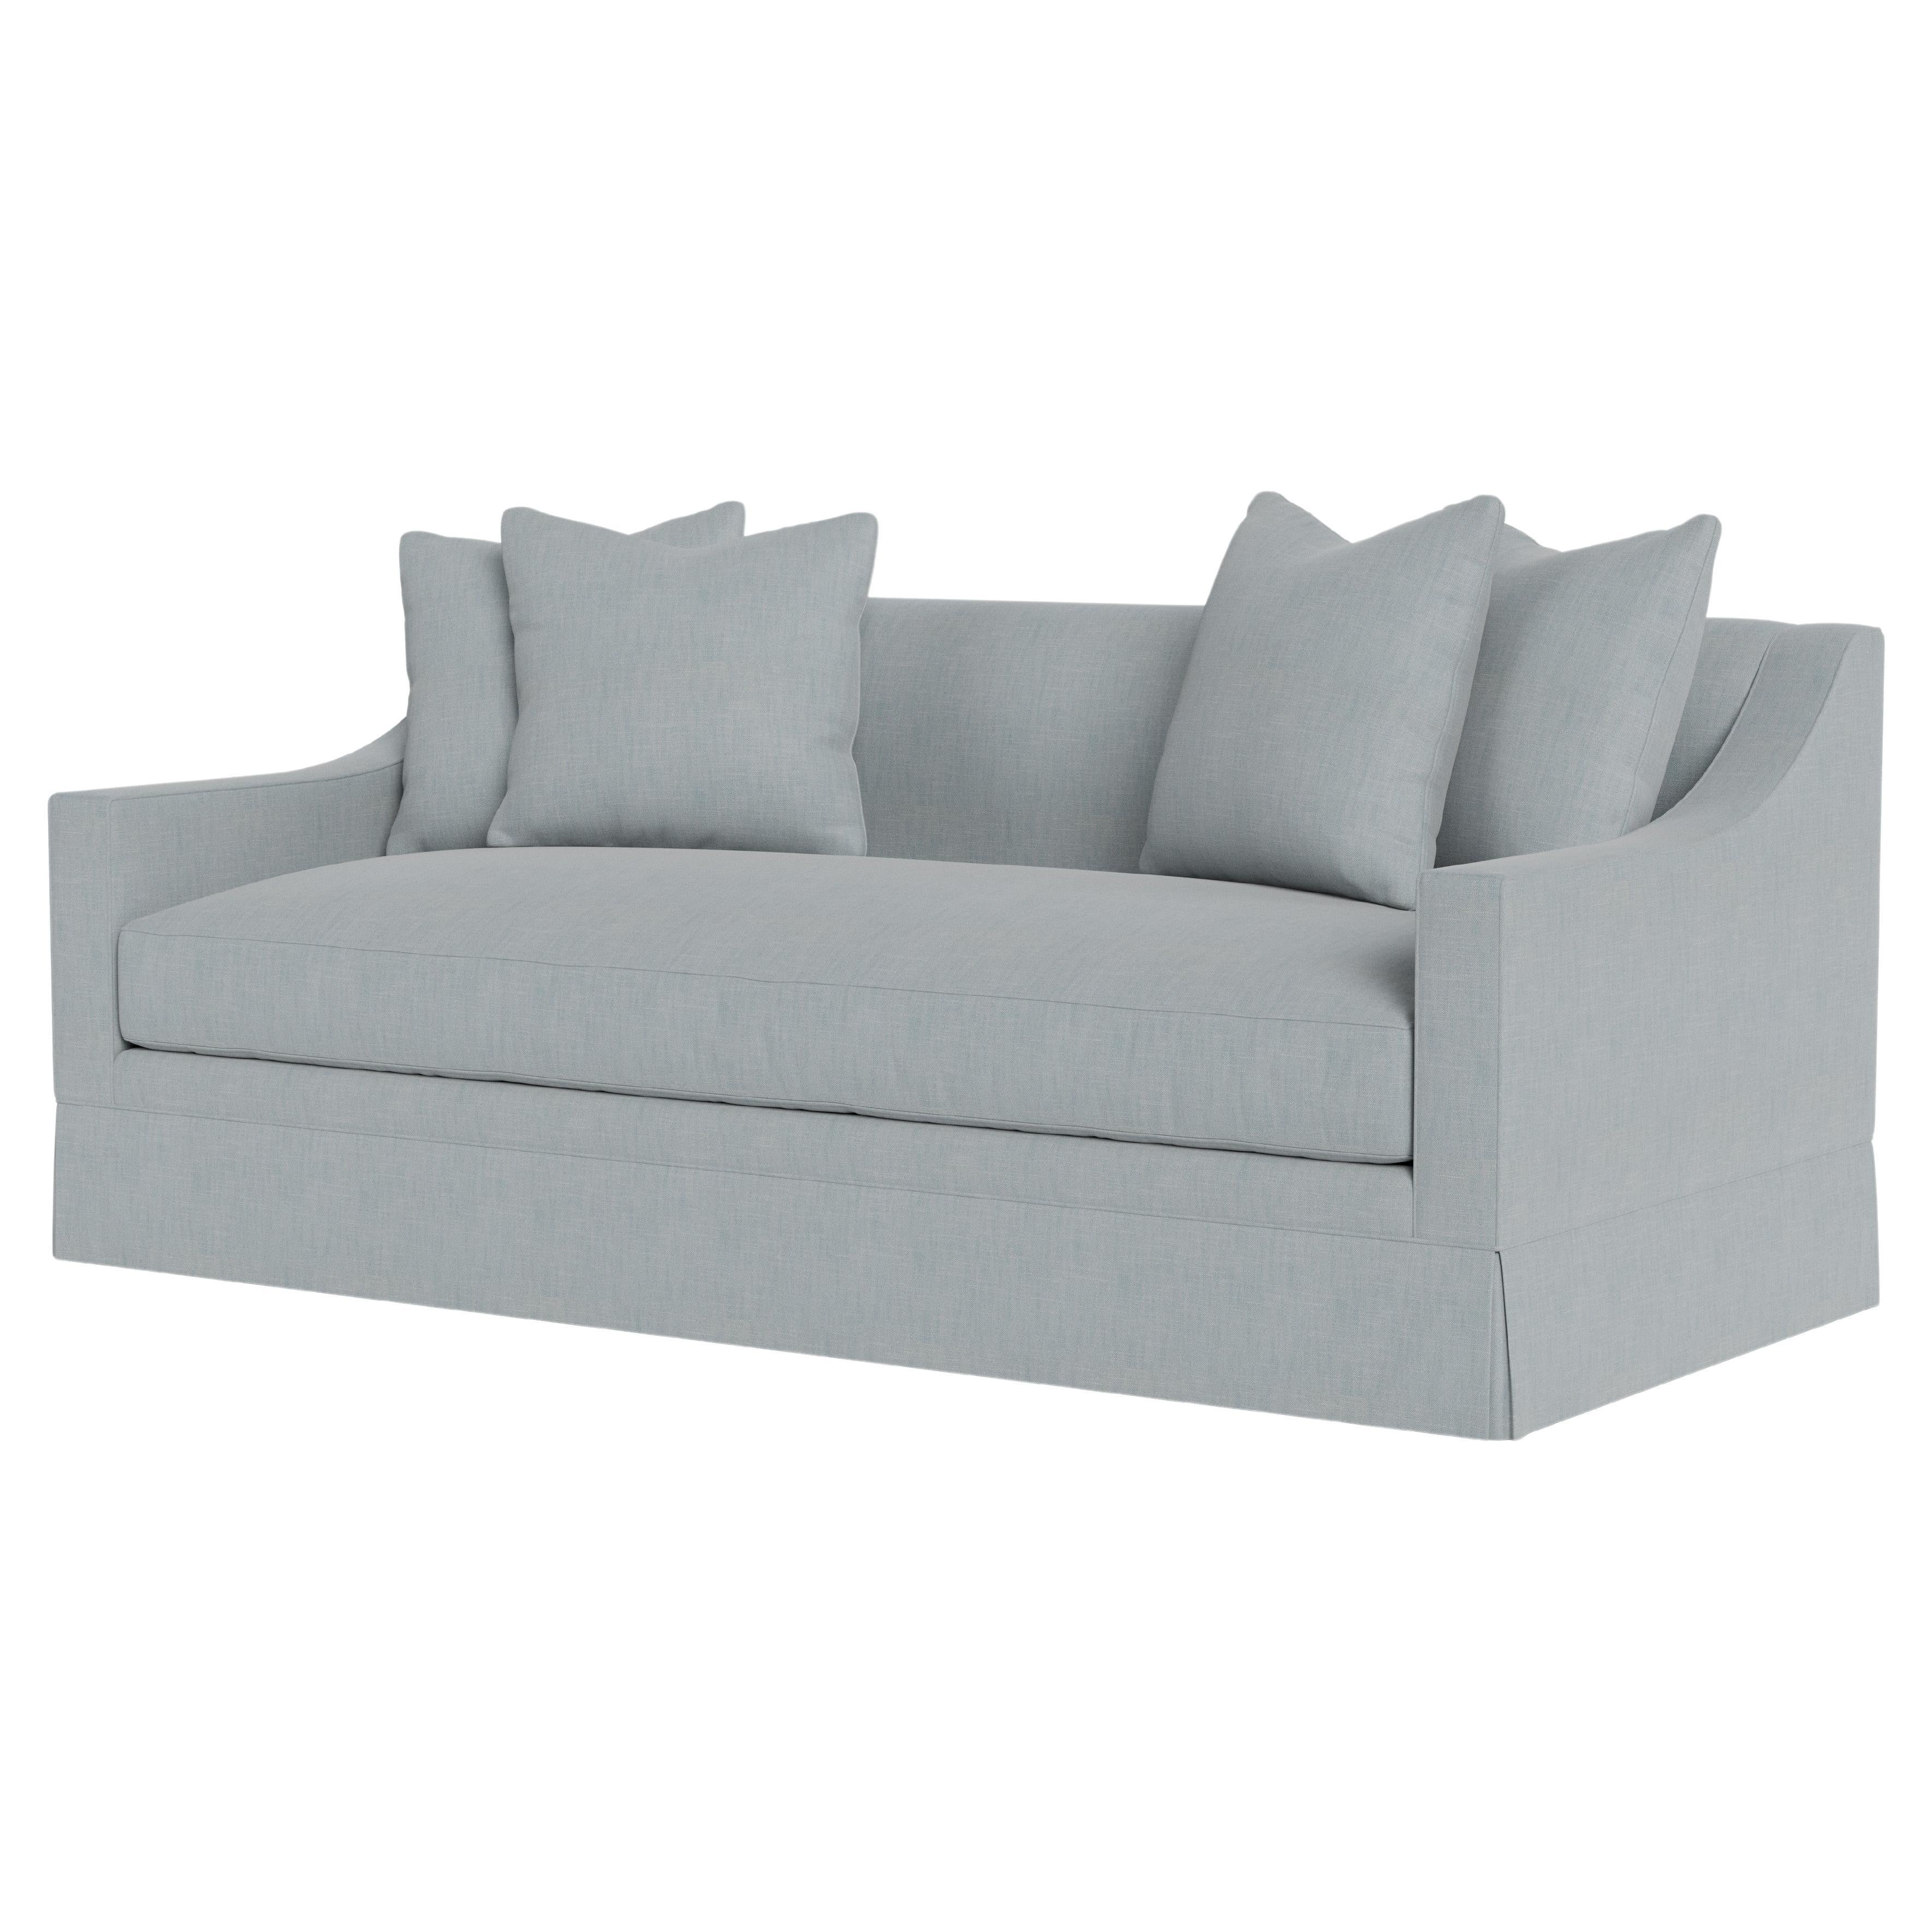 Bunny Williams Home Grant Sofa 81", Solid Performance Linen/Sky For Sale